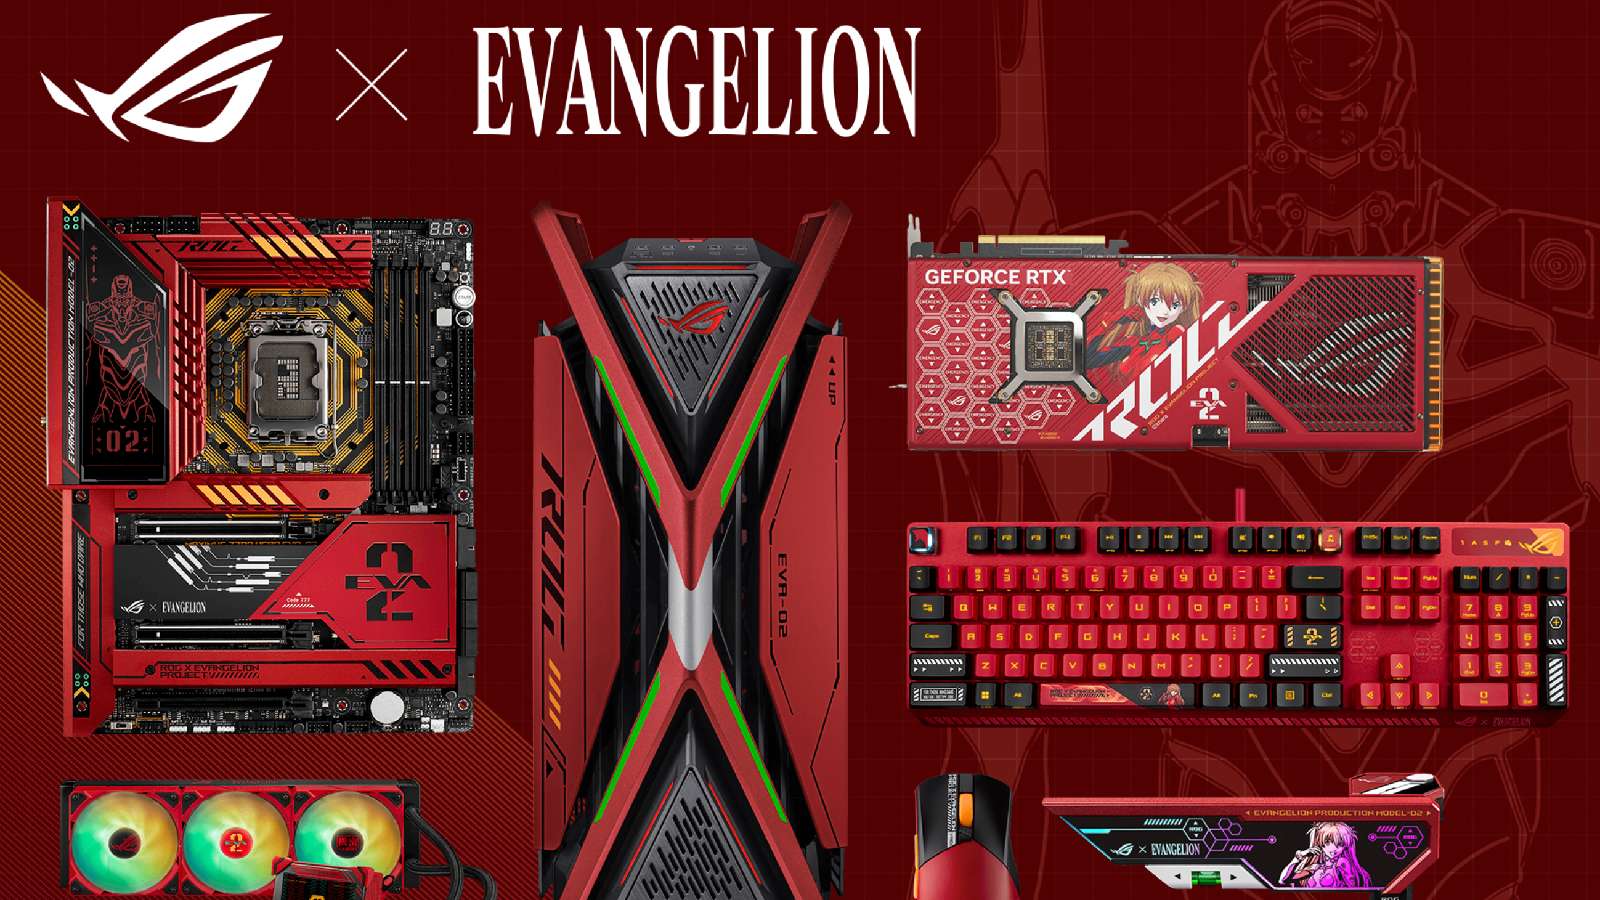 ASUS ROG Evangelion collab ships with major typo